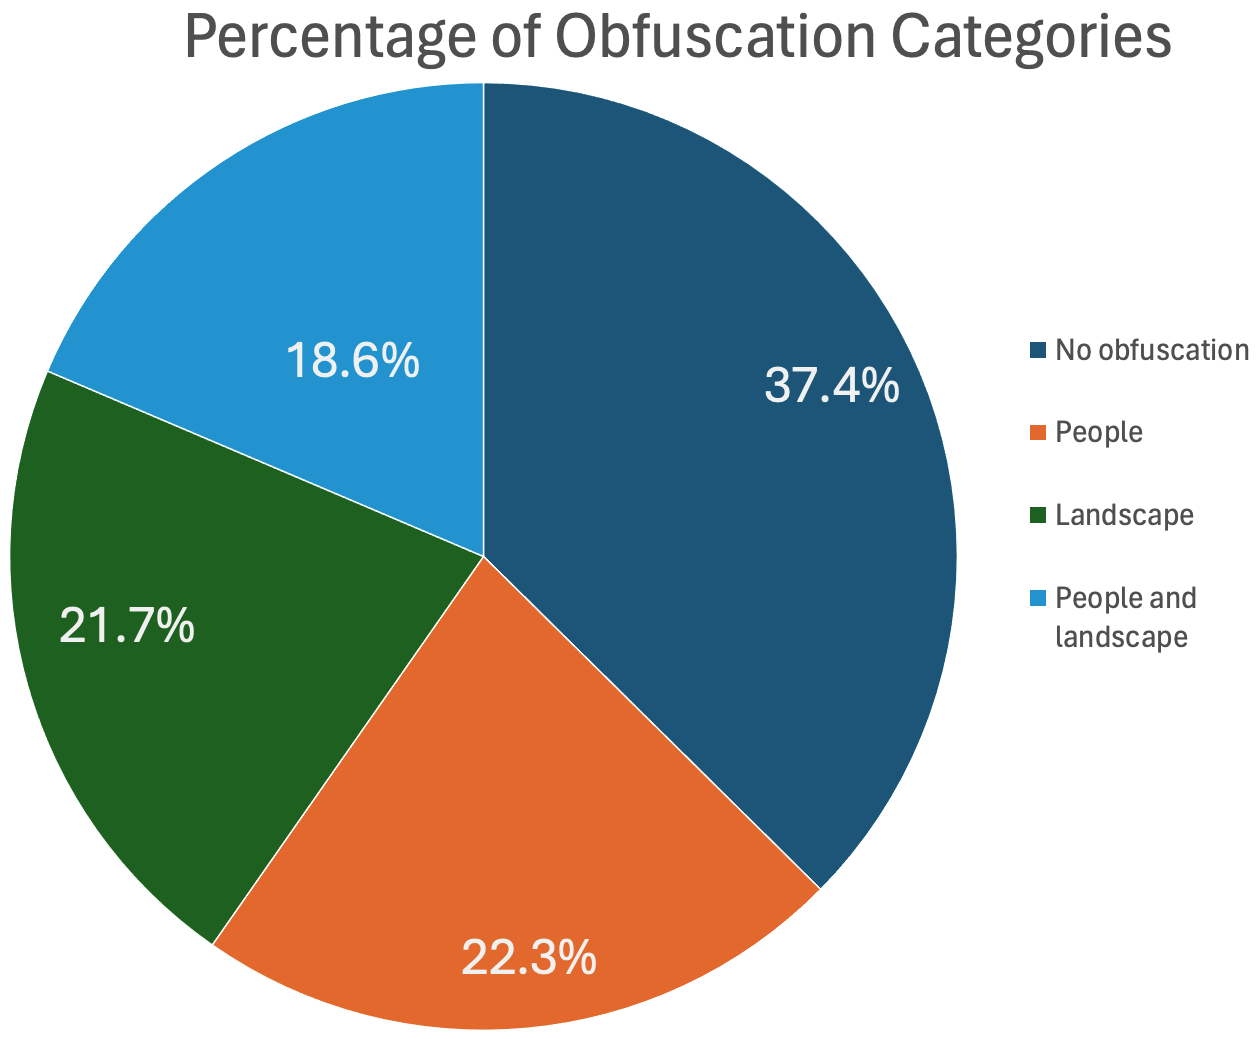 Pie chart showing the breakdown of obfuscation approaches in video releases, by percentage, with no obfuscation videos comprising that largest percentage at 37.4 percent. (Source: Carter Langham and Michael Loadenthal/DFRLab)